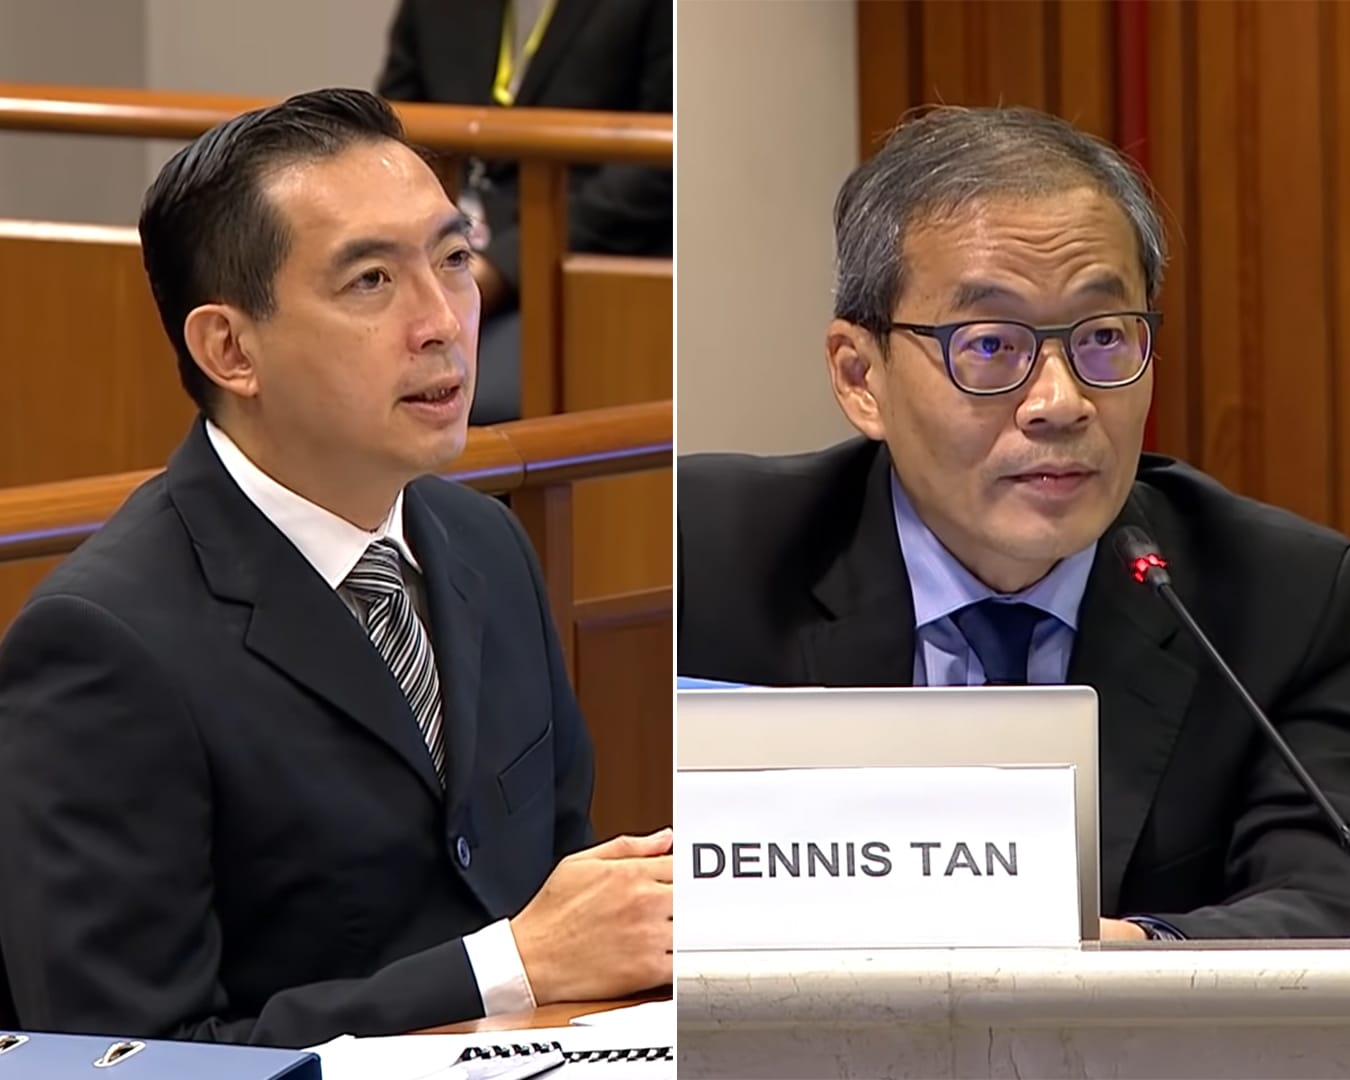 Psychiatrist Christopher Cheok (left) and the Workers' Party's Dennis Tan at a hearing by Parliament's privileges committee.